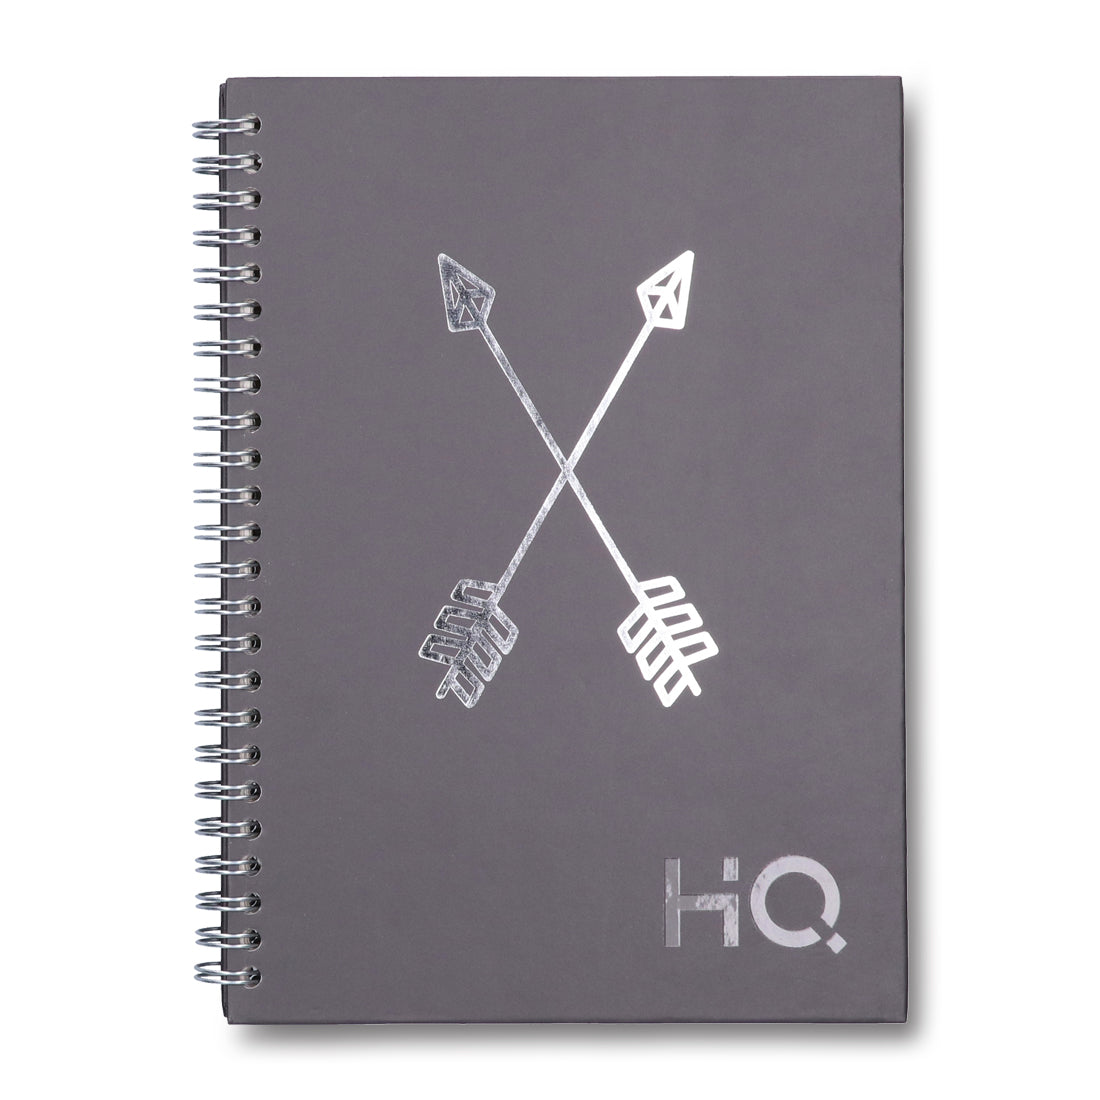 Navneet HQ | Hard Cover Notebook - Corporate Edge (Gray) for Office and Professional Use | Wiro Bound and Foil Stamping | Single Line | A5 Size - 21 cm x 14.8 cm | 192 Pages